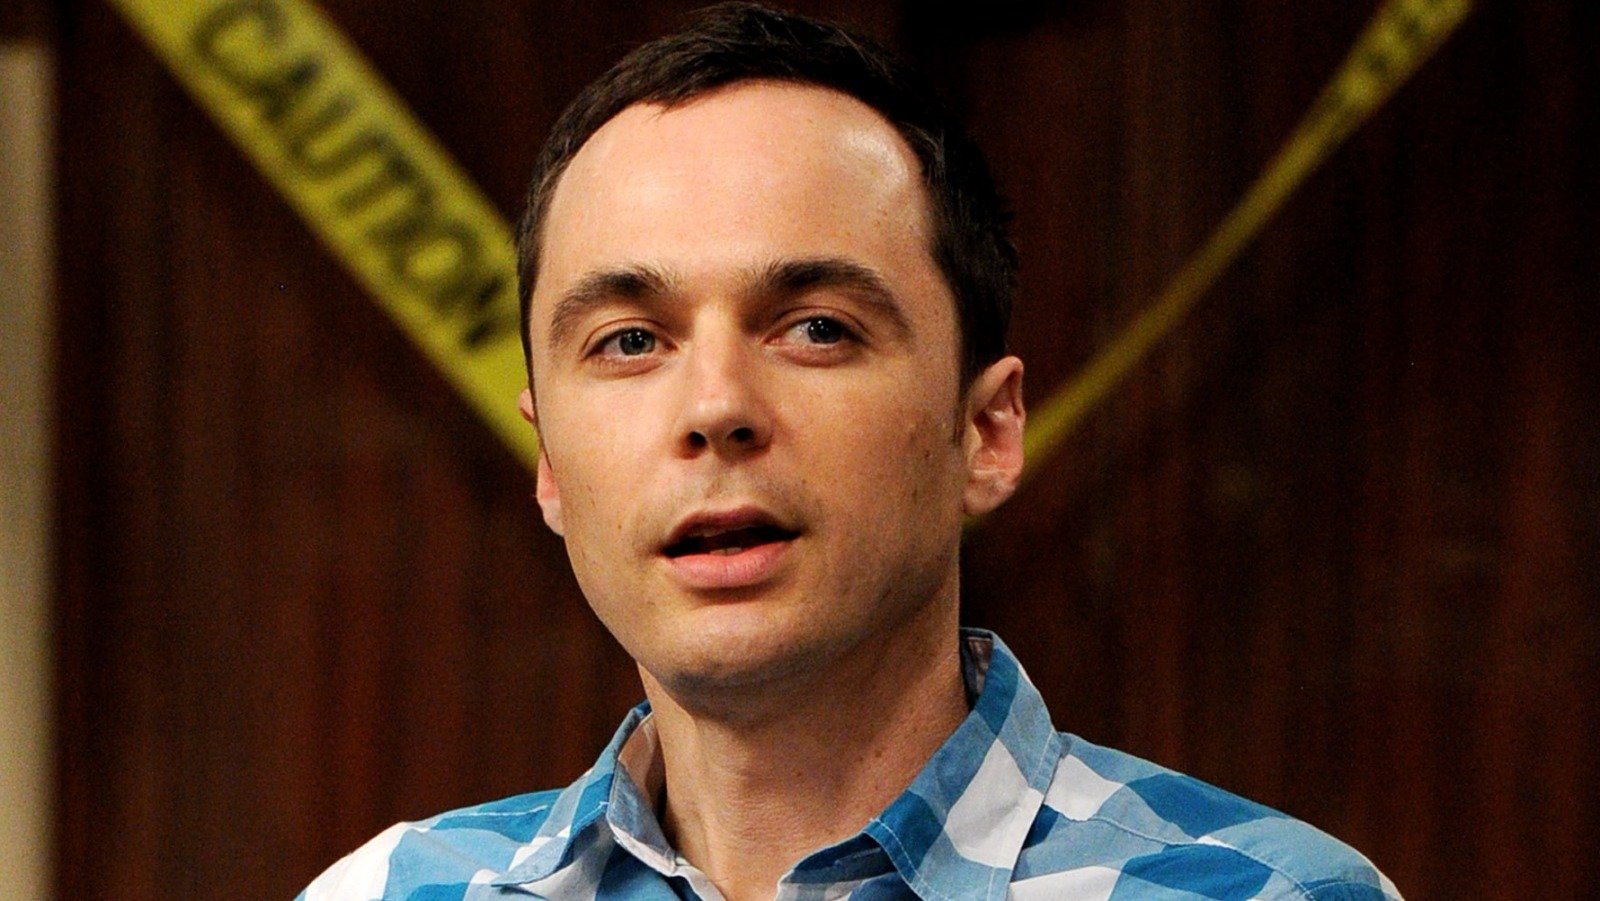 We Finally Know Why The Big Bang Theory Got Canceled